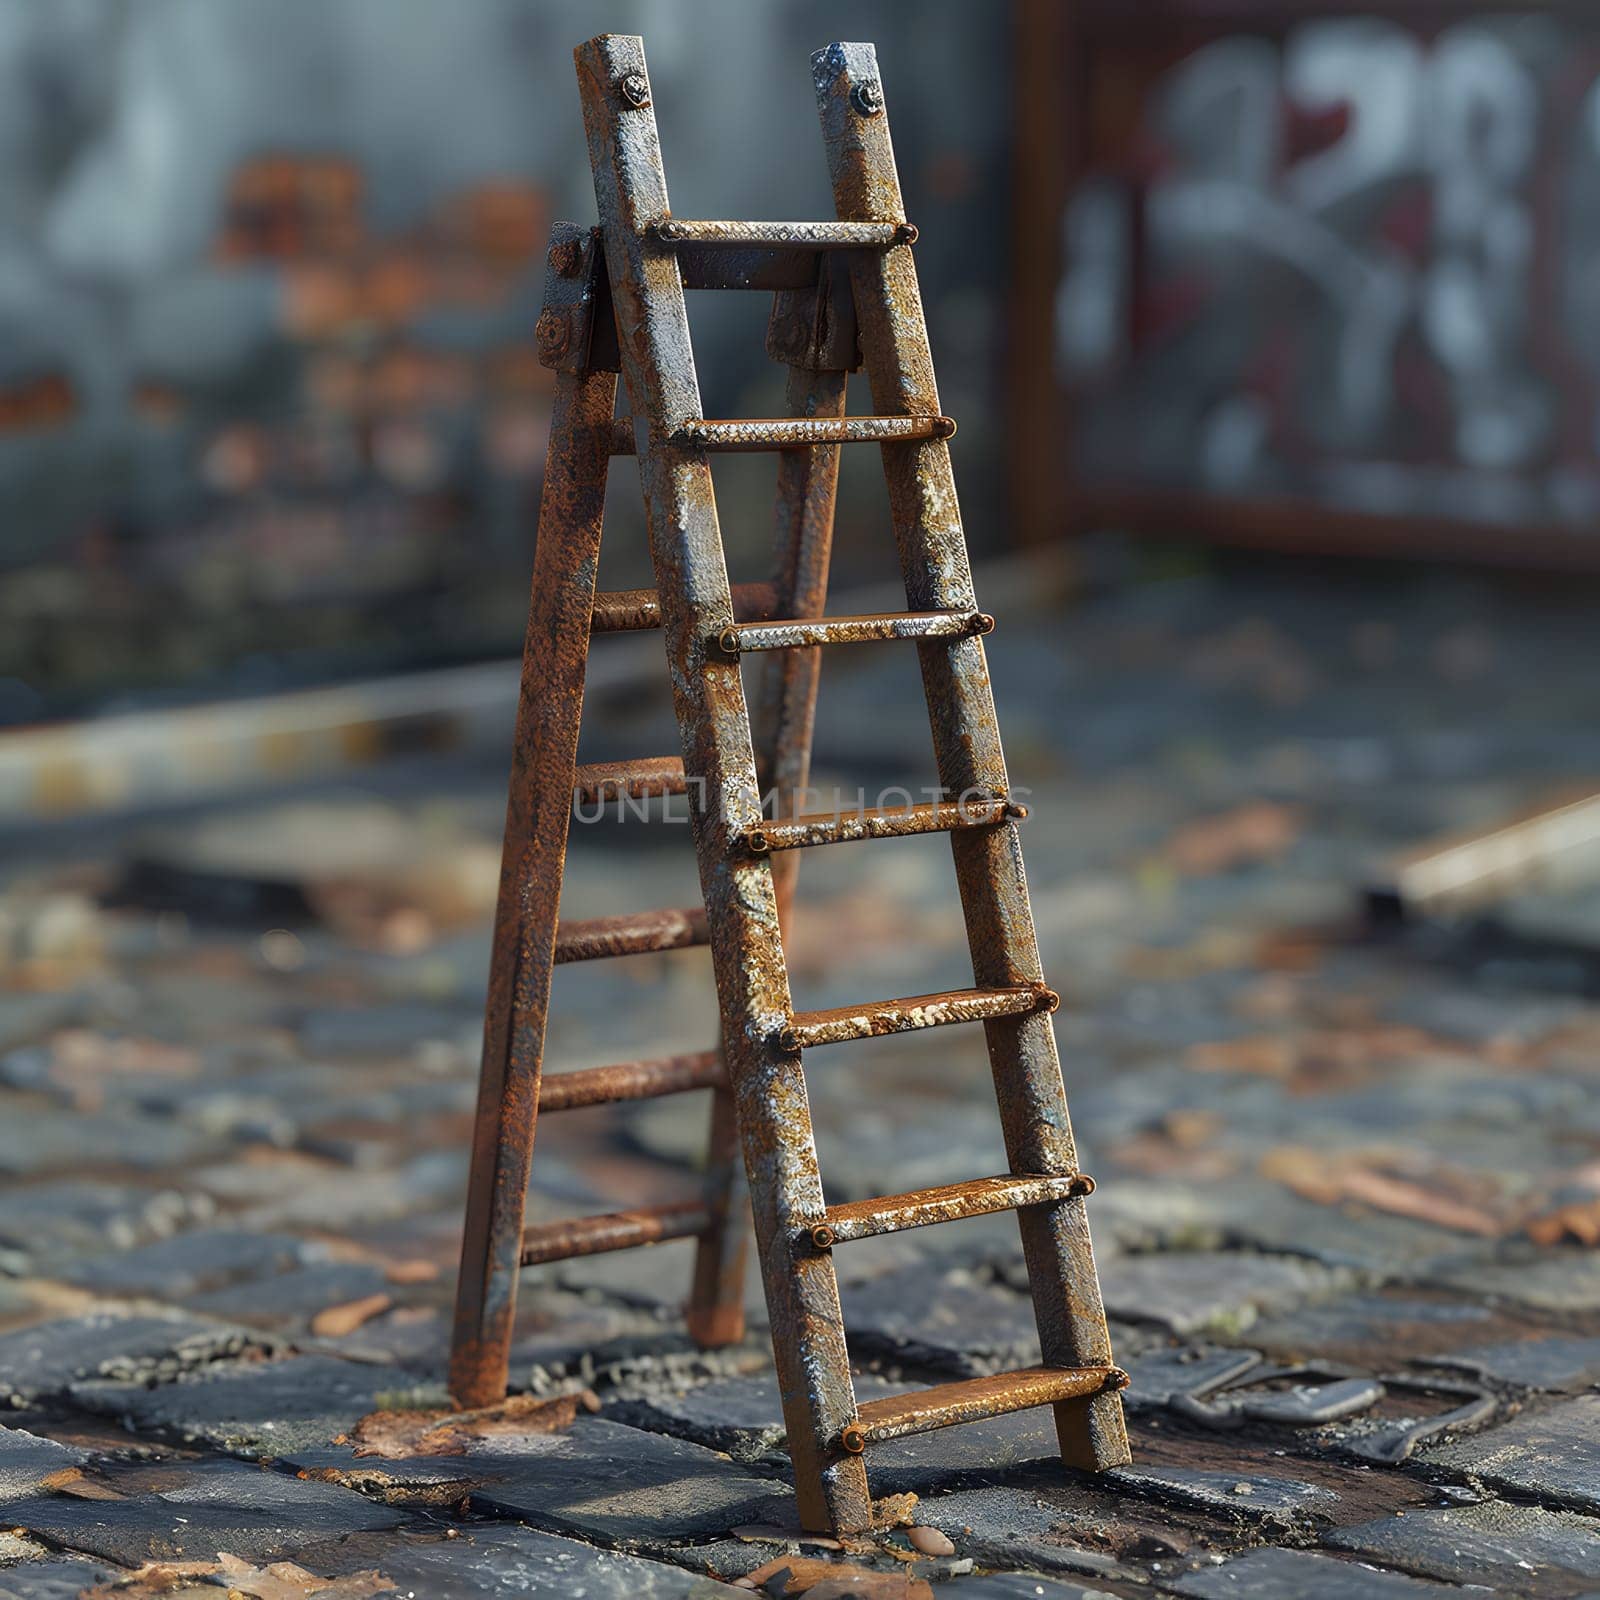 Rusty ladder rests on cobblestone artful still life in darkness by Nadtochiy